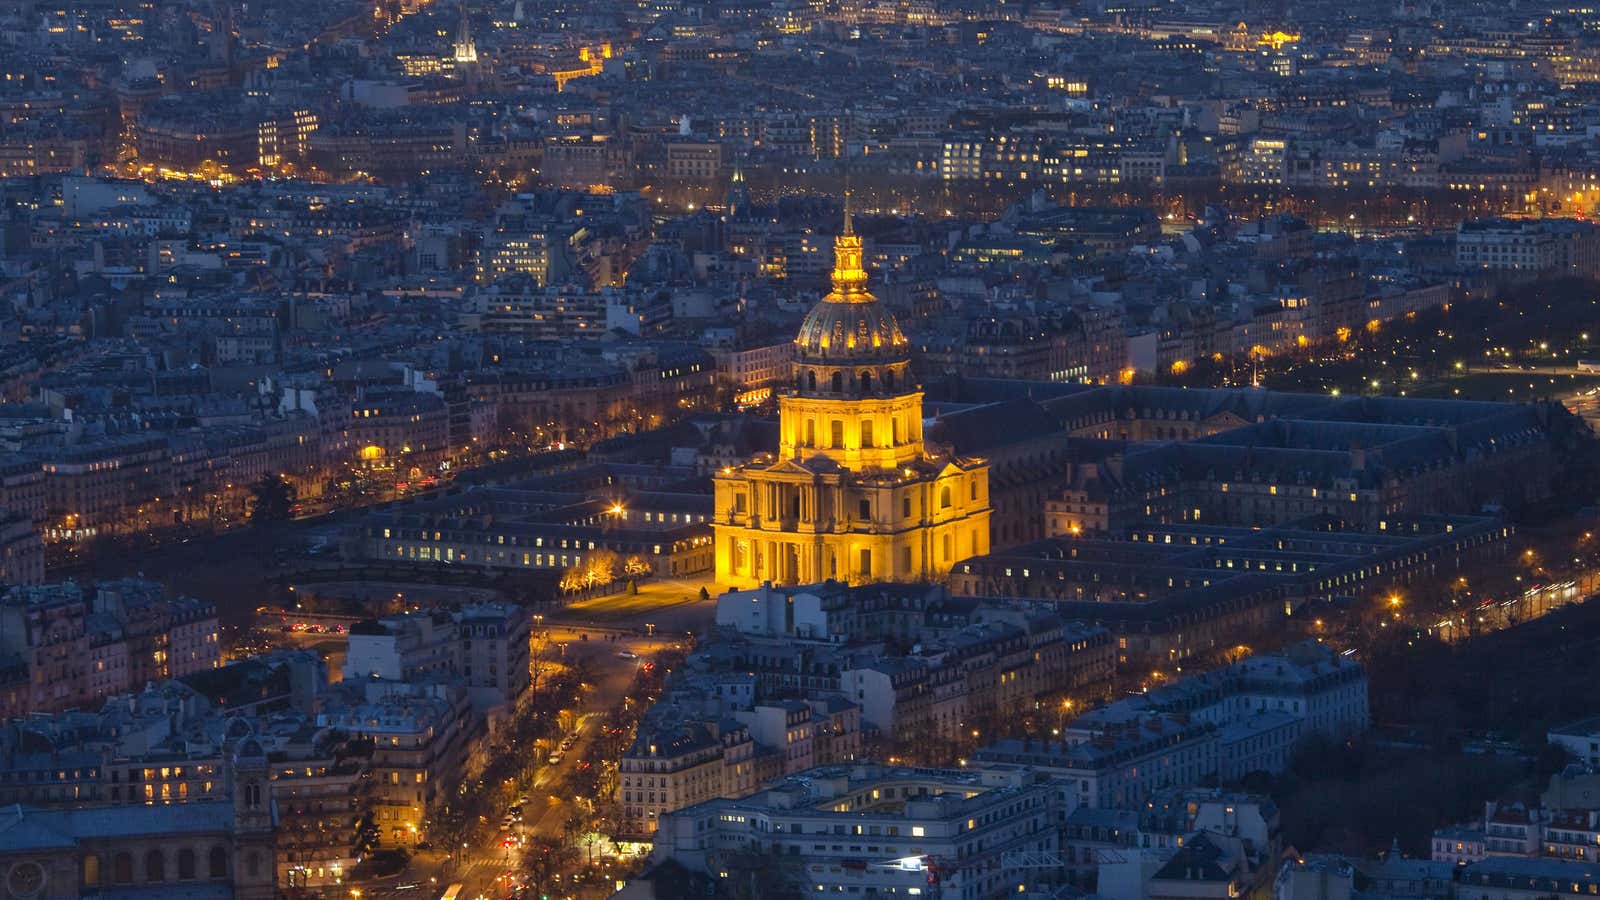 Les Invalides, one of the landmarks where mysterious drones have been spotted.